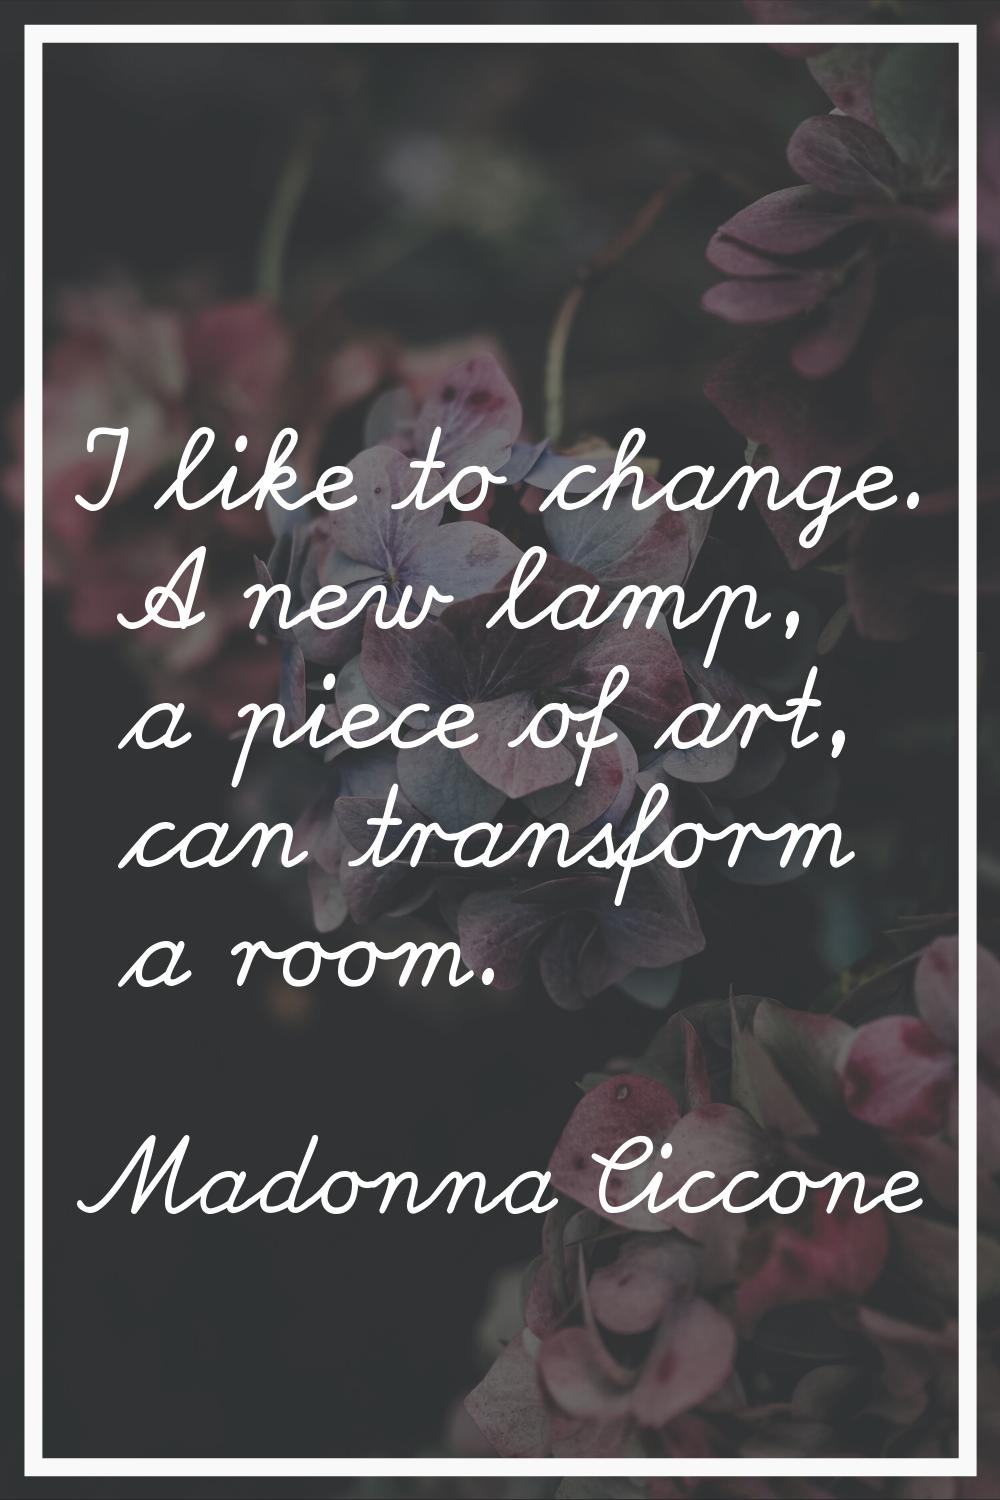 I like to change. A new lamp, a piece of art, can transform a room.